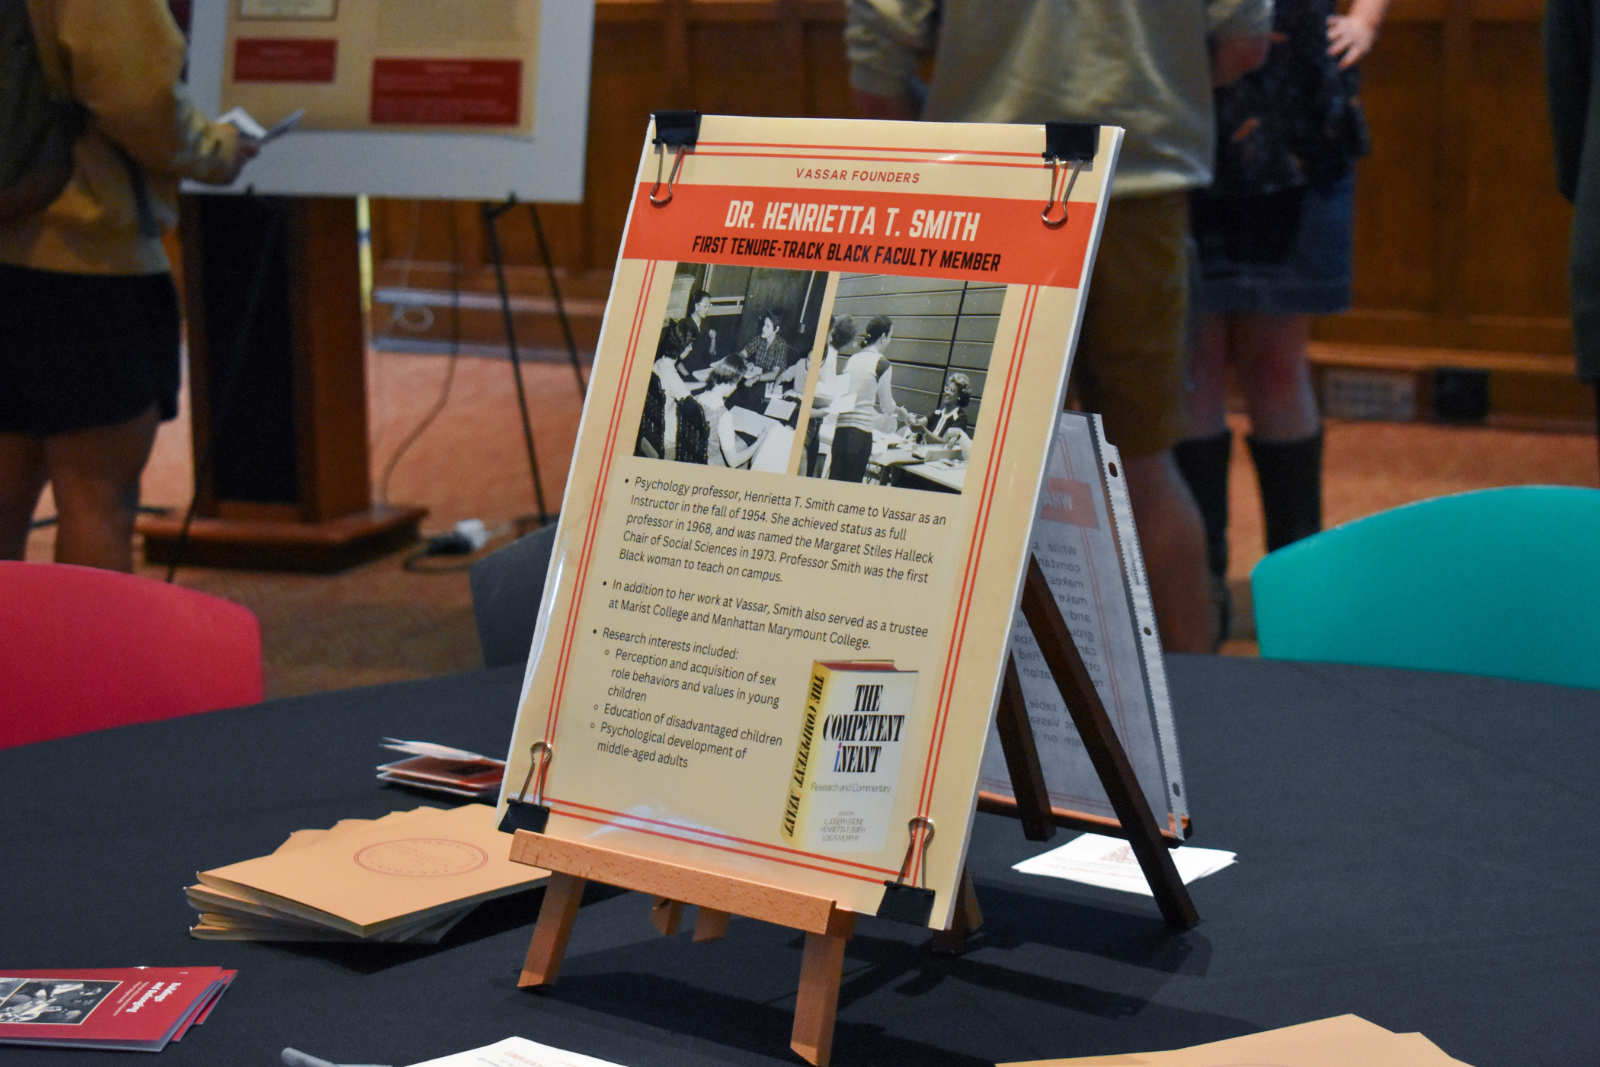 A poster placed on a table. The poster reads “Dr. Henrietta T. Smith, First Tenure-track Black Faculty Member”.